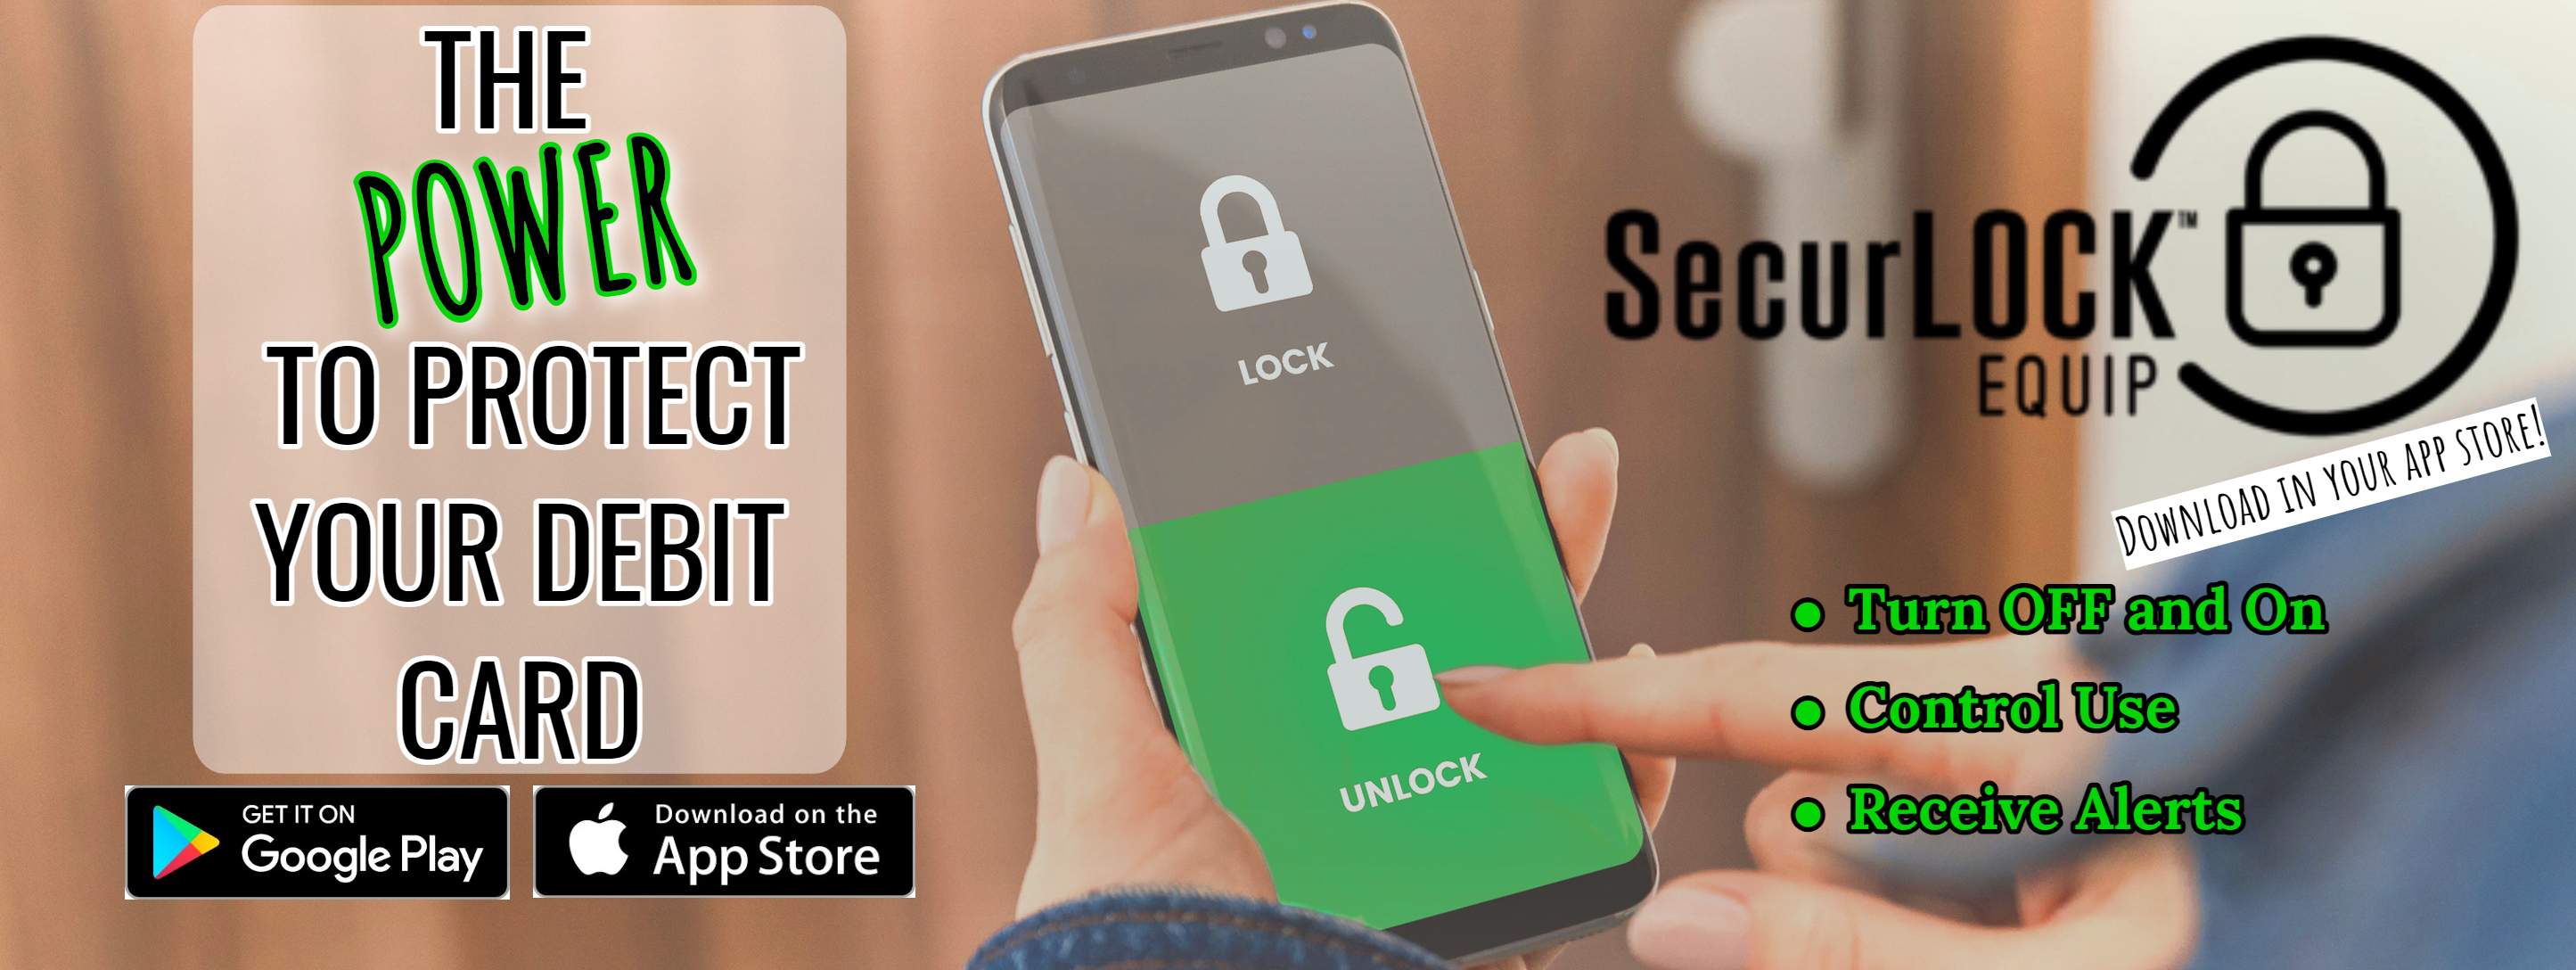 SecureLock - The Power to protect your debit card. Download in your app store.